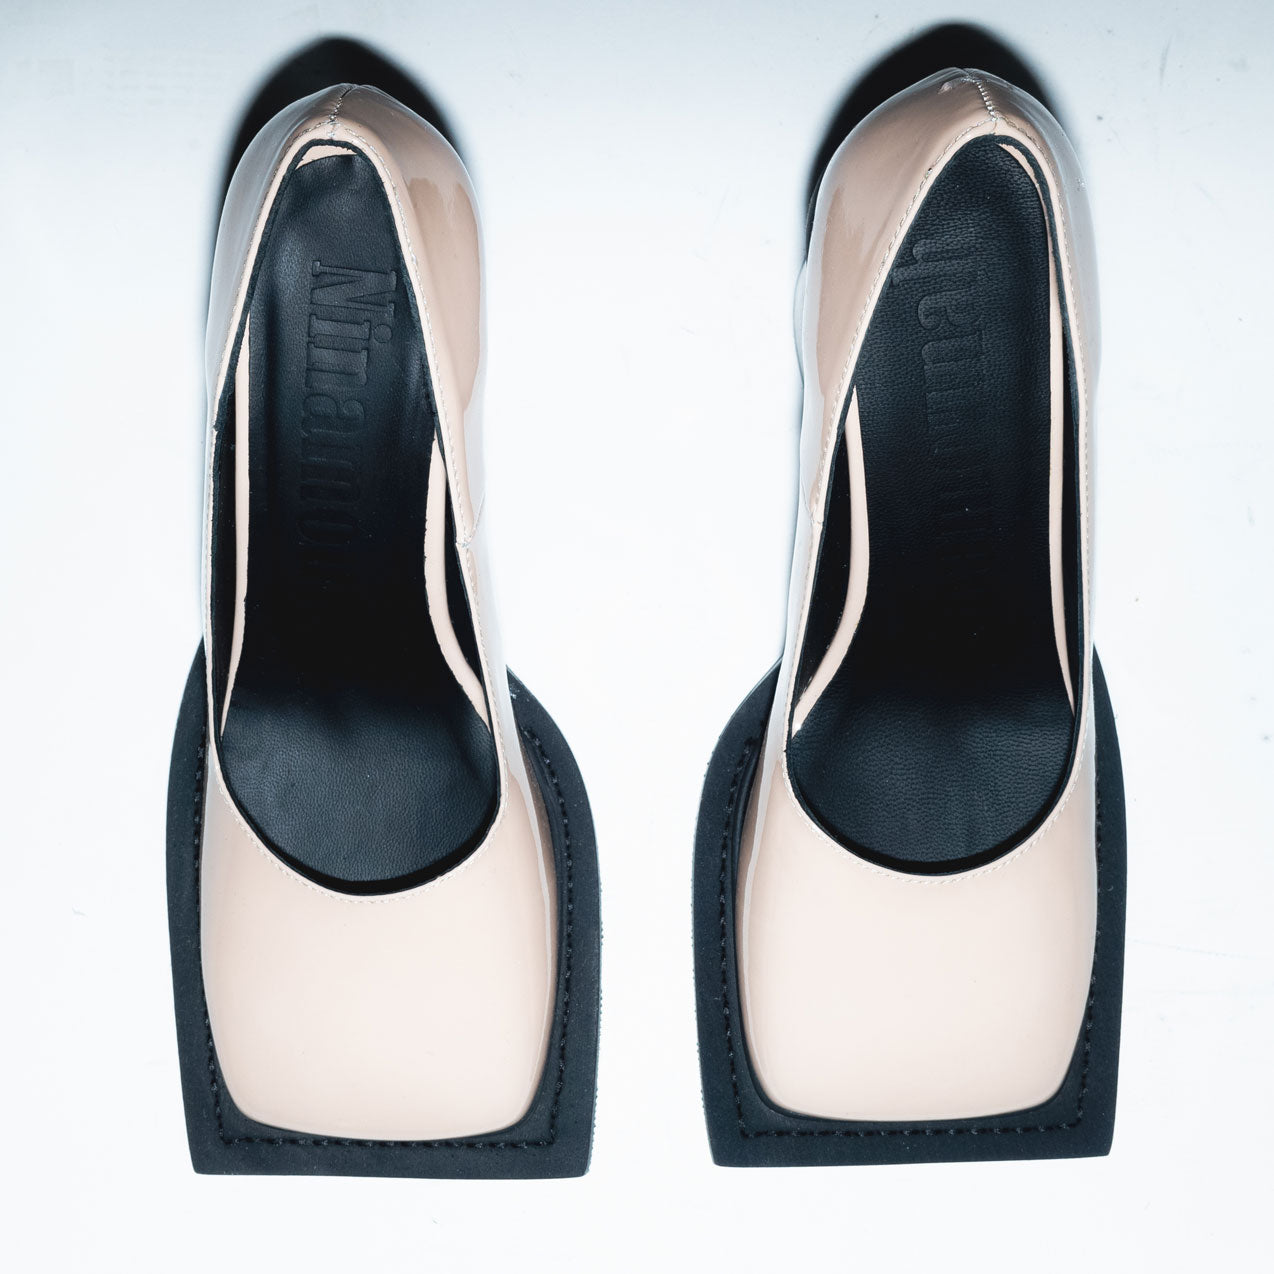 Archive Howl Pumps in Soft Pink Patent Leather